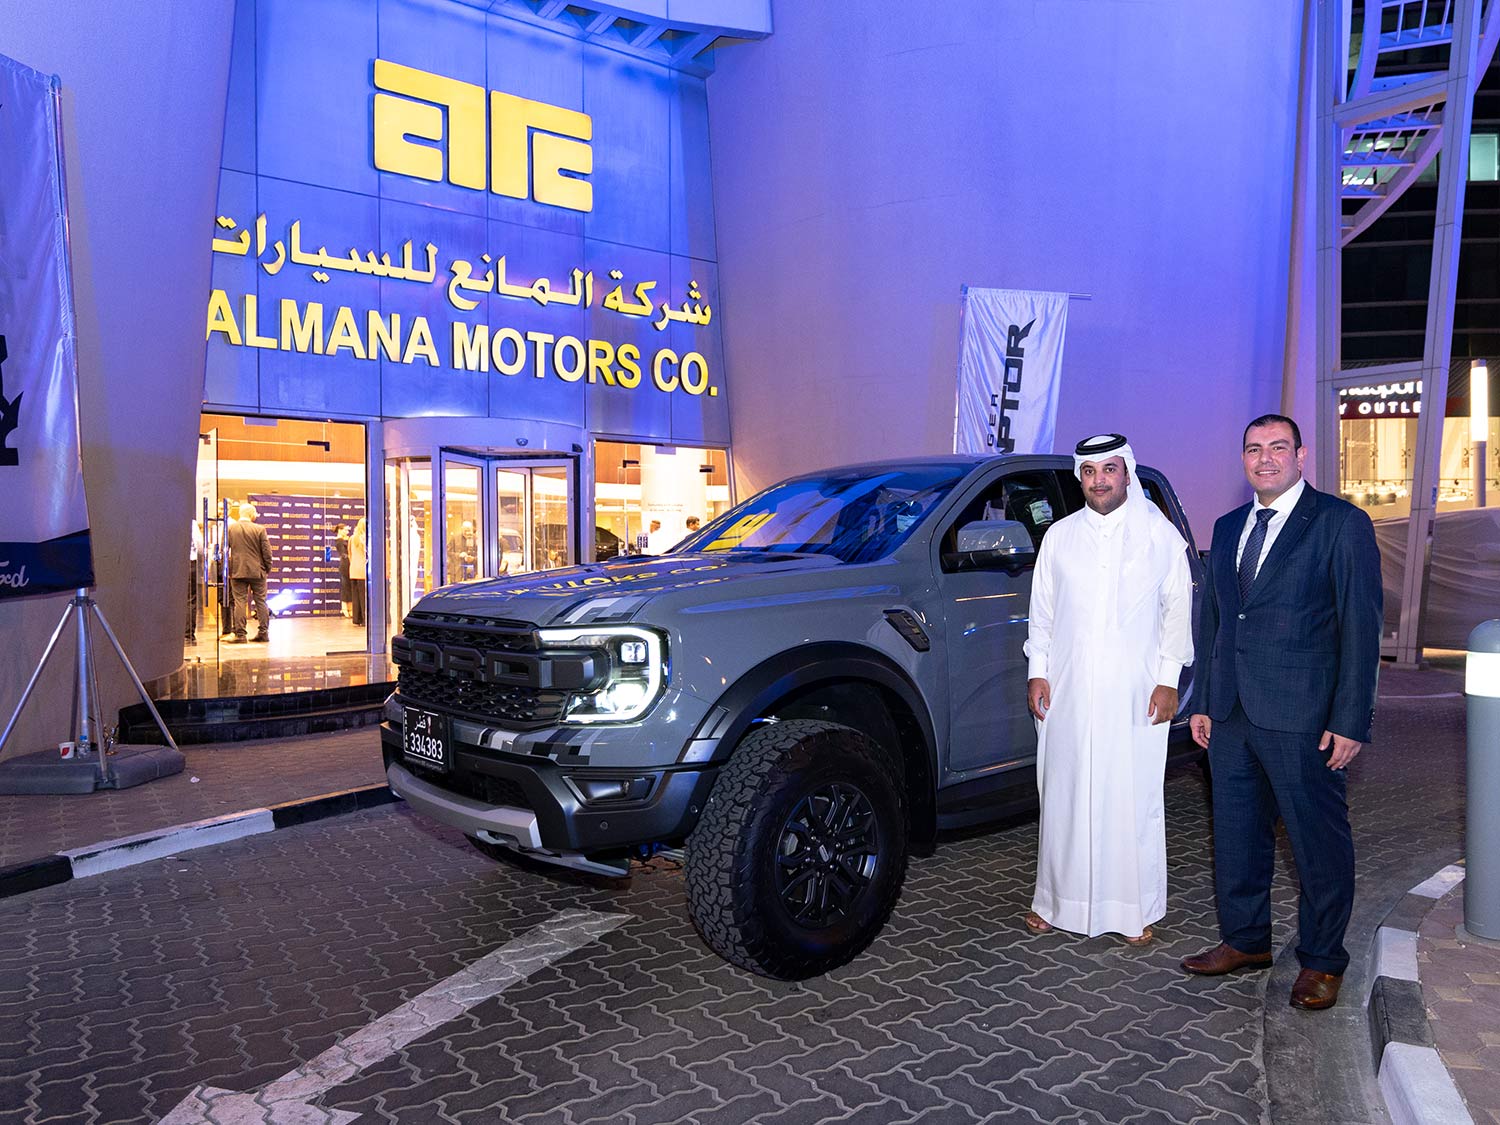 FORD’S NEXT GENERATION RANGER RAPTOR IS REVELED BY AL MANA MOTORS FOR THE FIRST TIME IN THE MIDDLE EAST